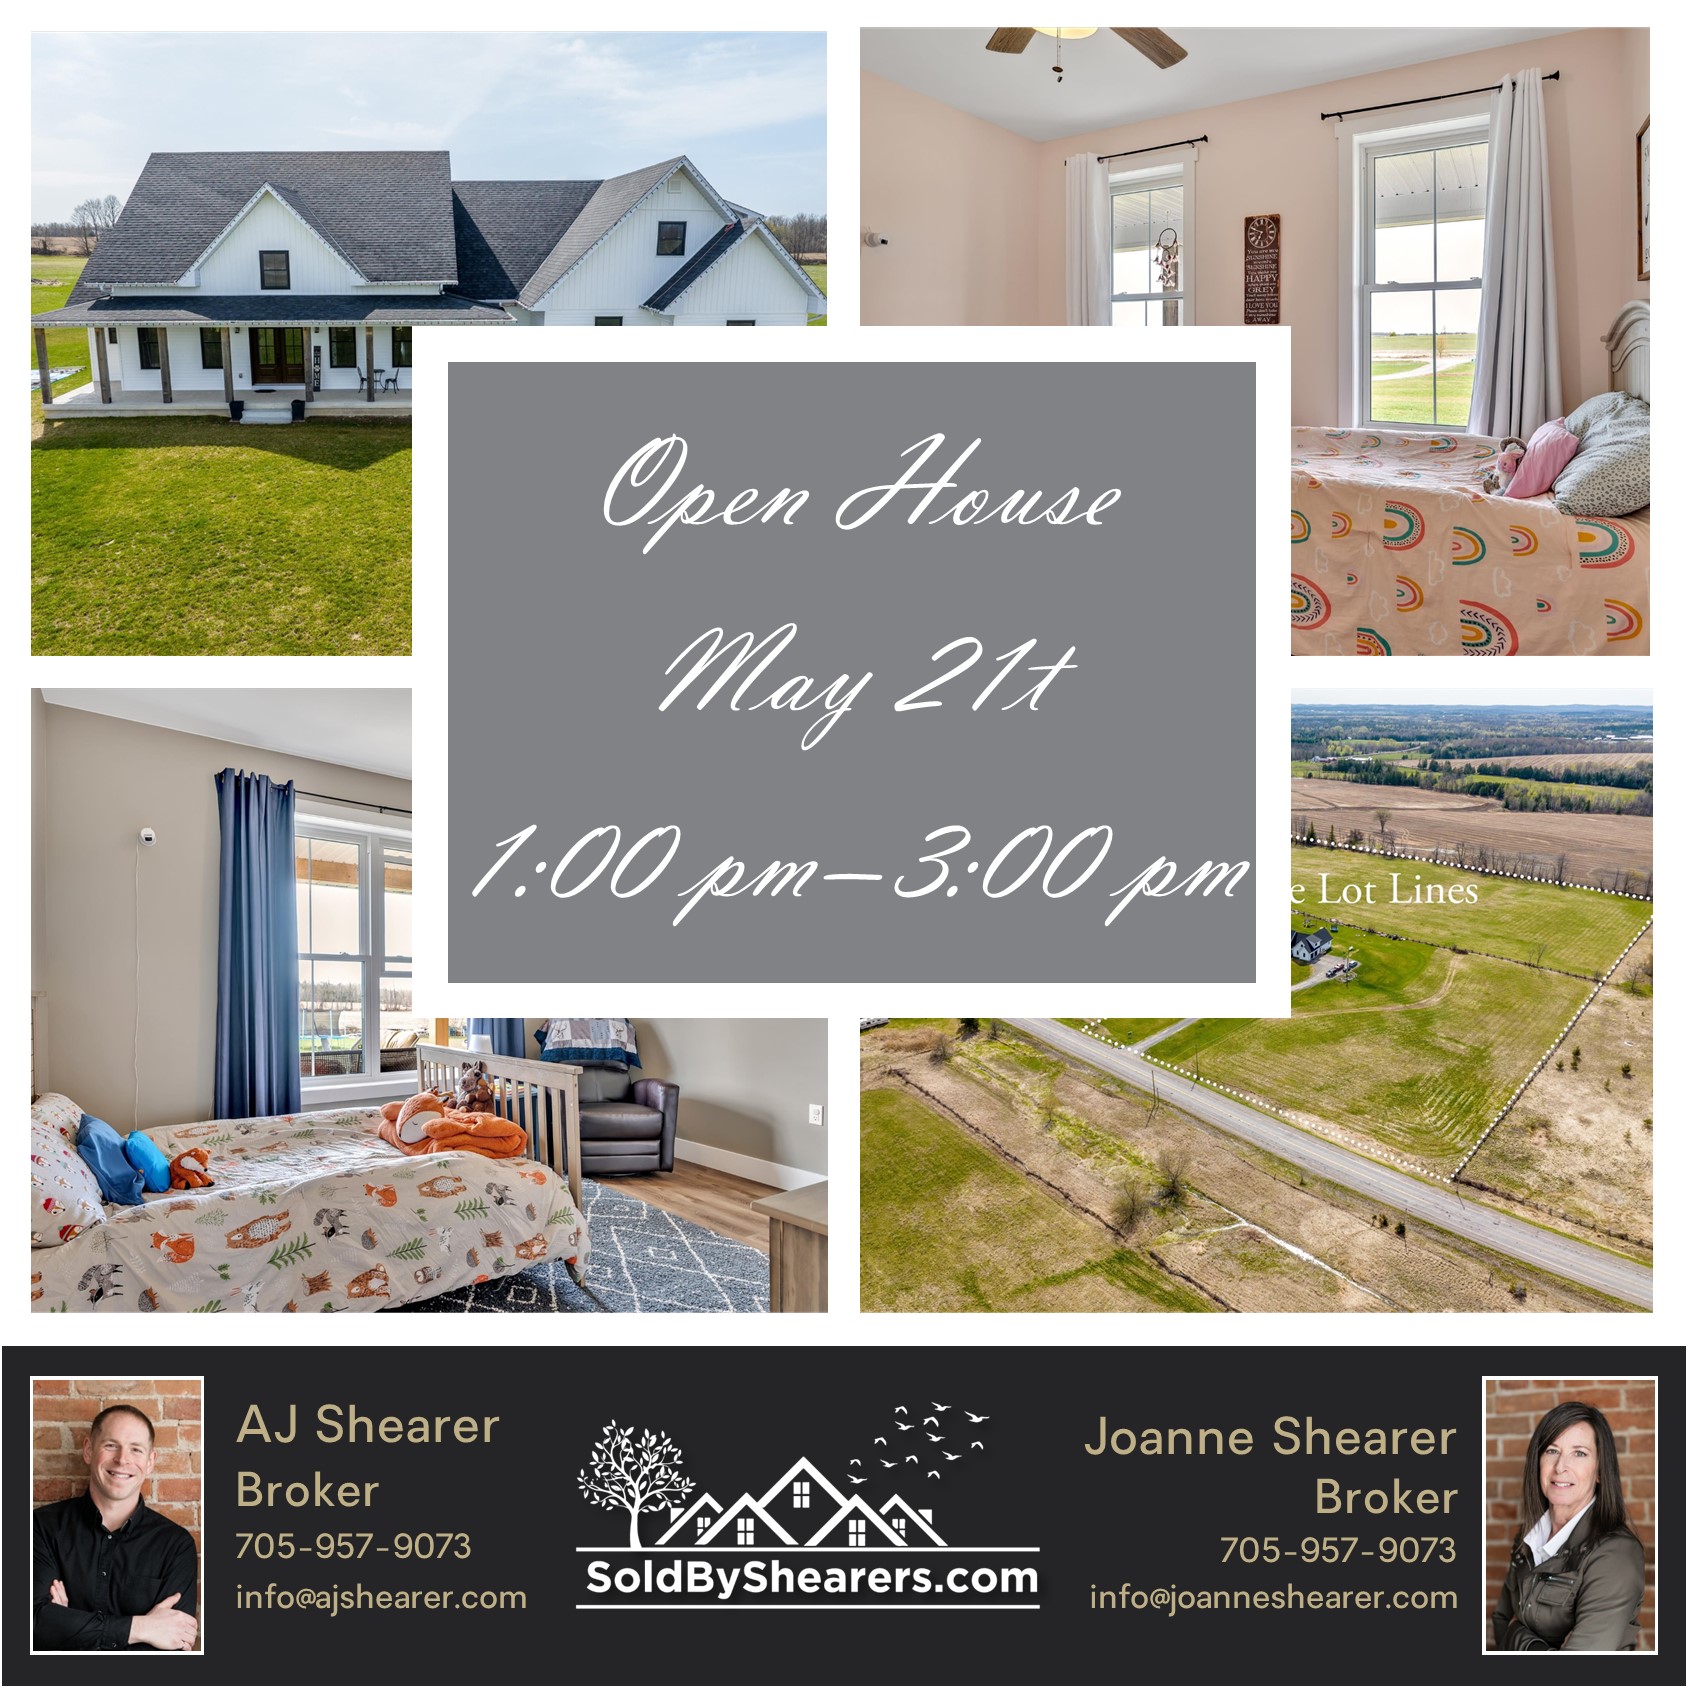 Open House May 21